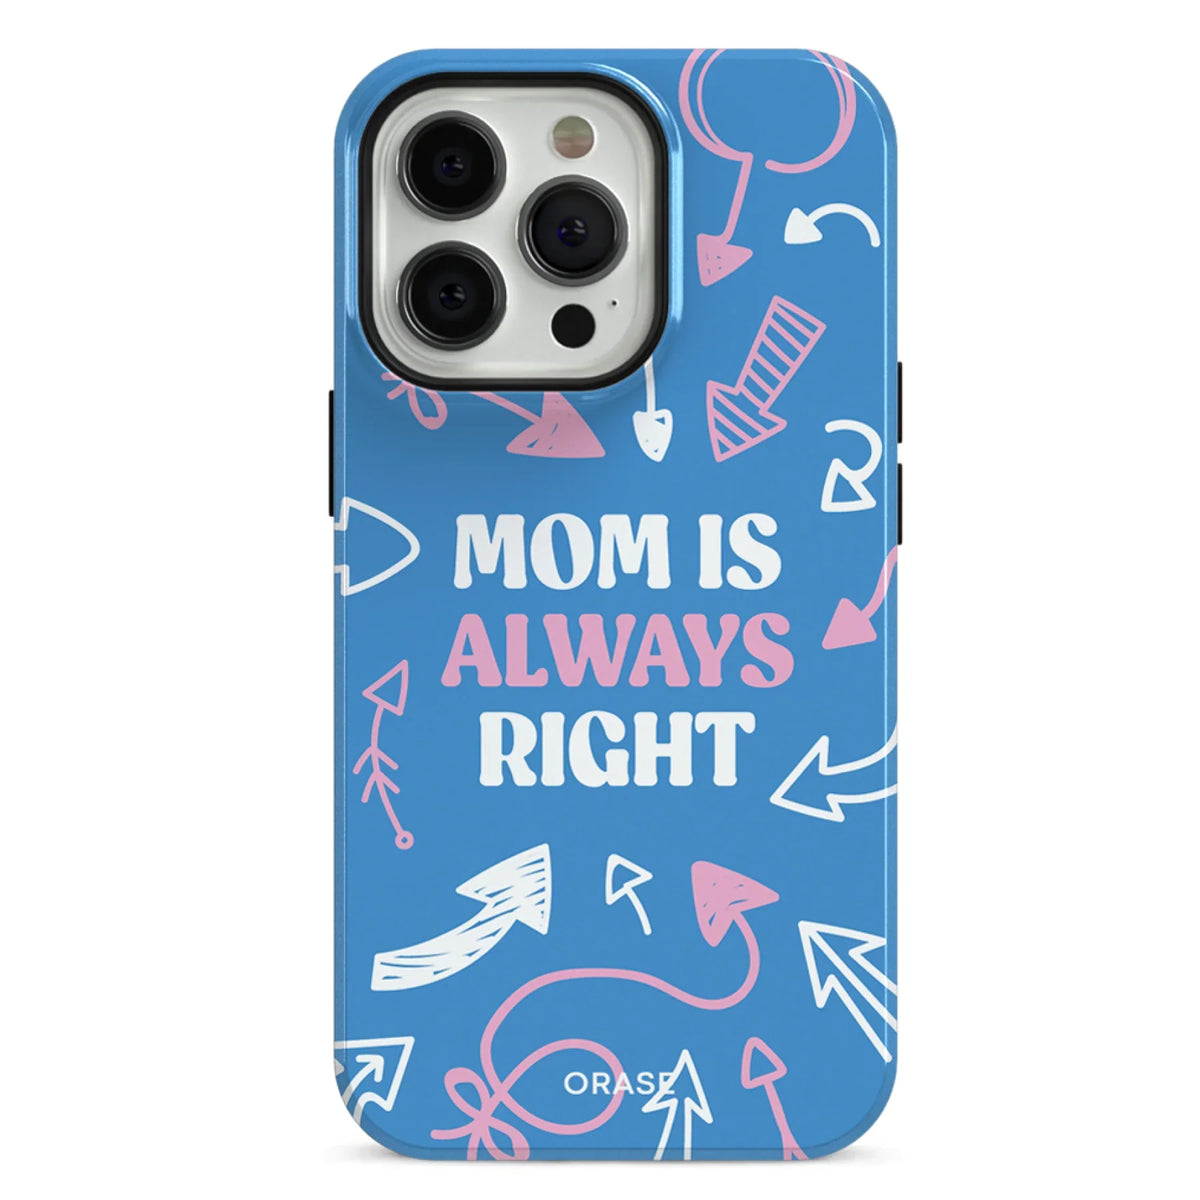 Mom Is Always Right iPhone Case - iPhone 11